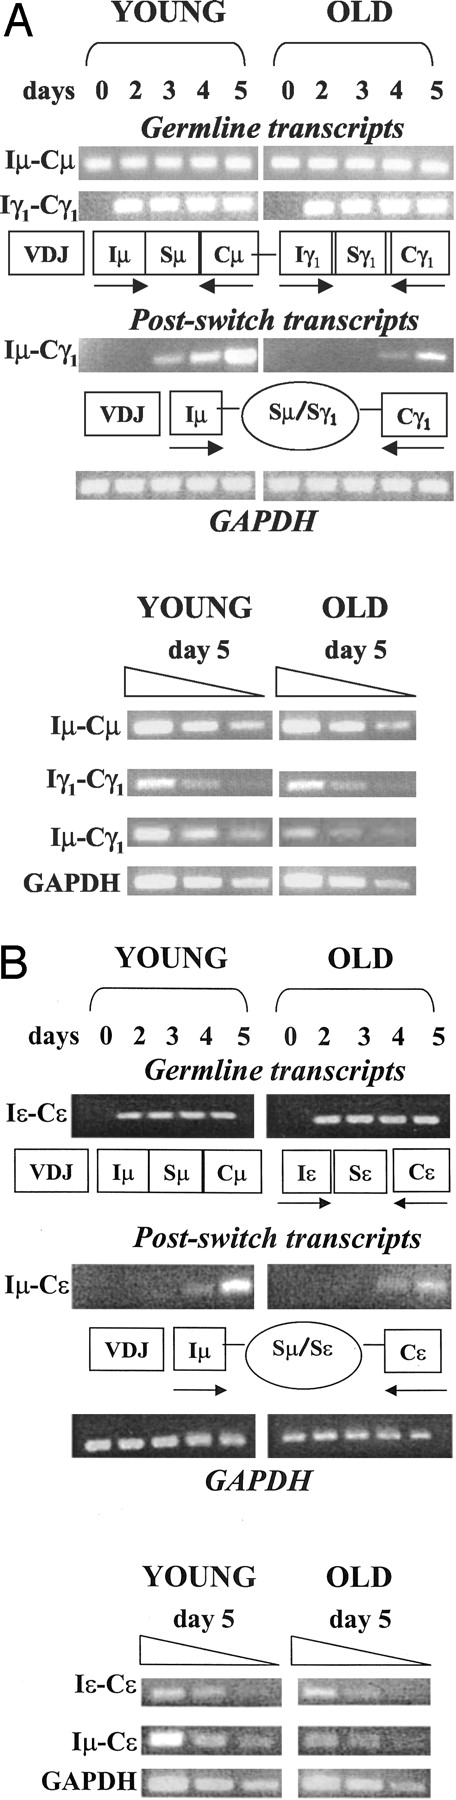 FIGURE 5. CSR but not GLT is impaired in activated splenic B cells from old mice. Splenic B cells (106 cells/ml) were stimulated for 2–5 days with anti-CD40/IL-4 or left unstimulated. After these times, cells were harvested, RNA extracted and RT-PCR reactions performed. A, GLT for μ and γ1 and postswitch transcripts for γ1. The arrows indicate the forward and reverse primer areas used for Iμ-Cμ and Iγ1-Cγ1 GLT and for Iμ-Cγ1 postswitch transcripts. Linear range for PCR was also established for young and old samples (bottom). B, GLT/postswitch transcripts for ε. The arrows indicate the forward and reverse primer areas used for Iε-Cε GLT and for Iμ-Cε postswitch transcripts. Linear range for PCR was also established for young and old samples (bottom). Results are representative of four (μ) and five (γ1 and ε) independent experiments.